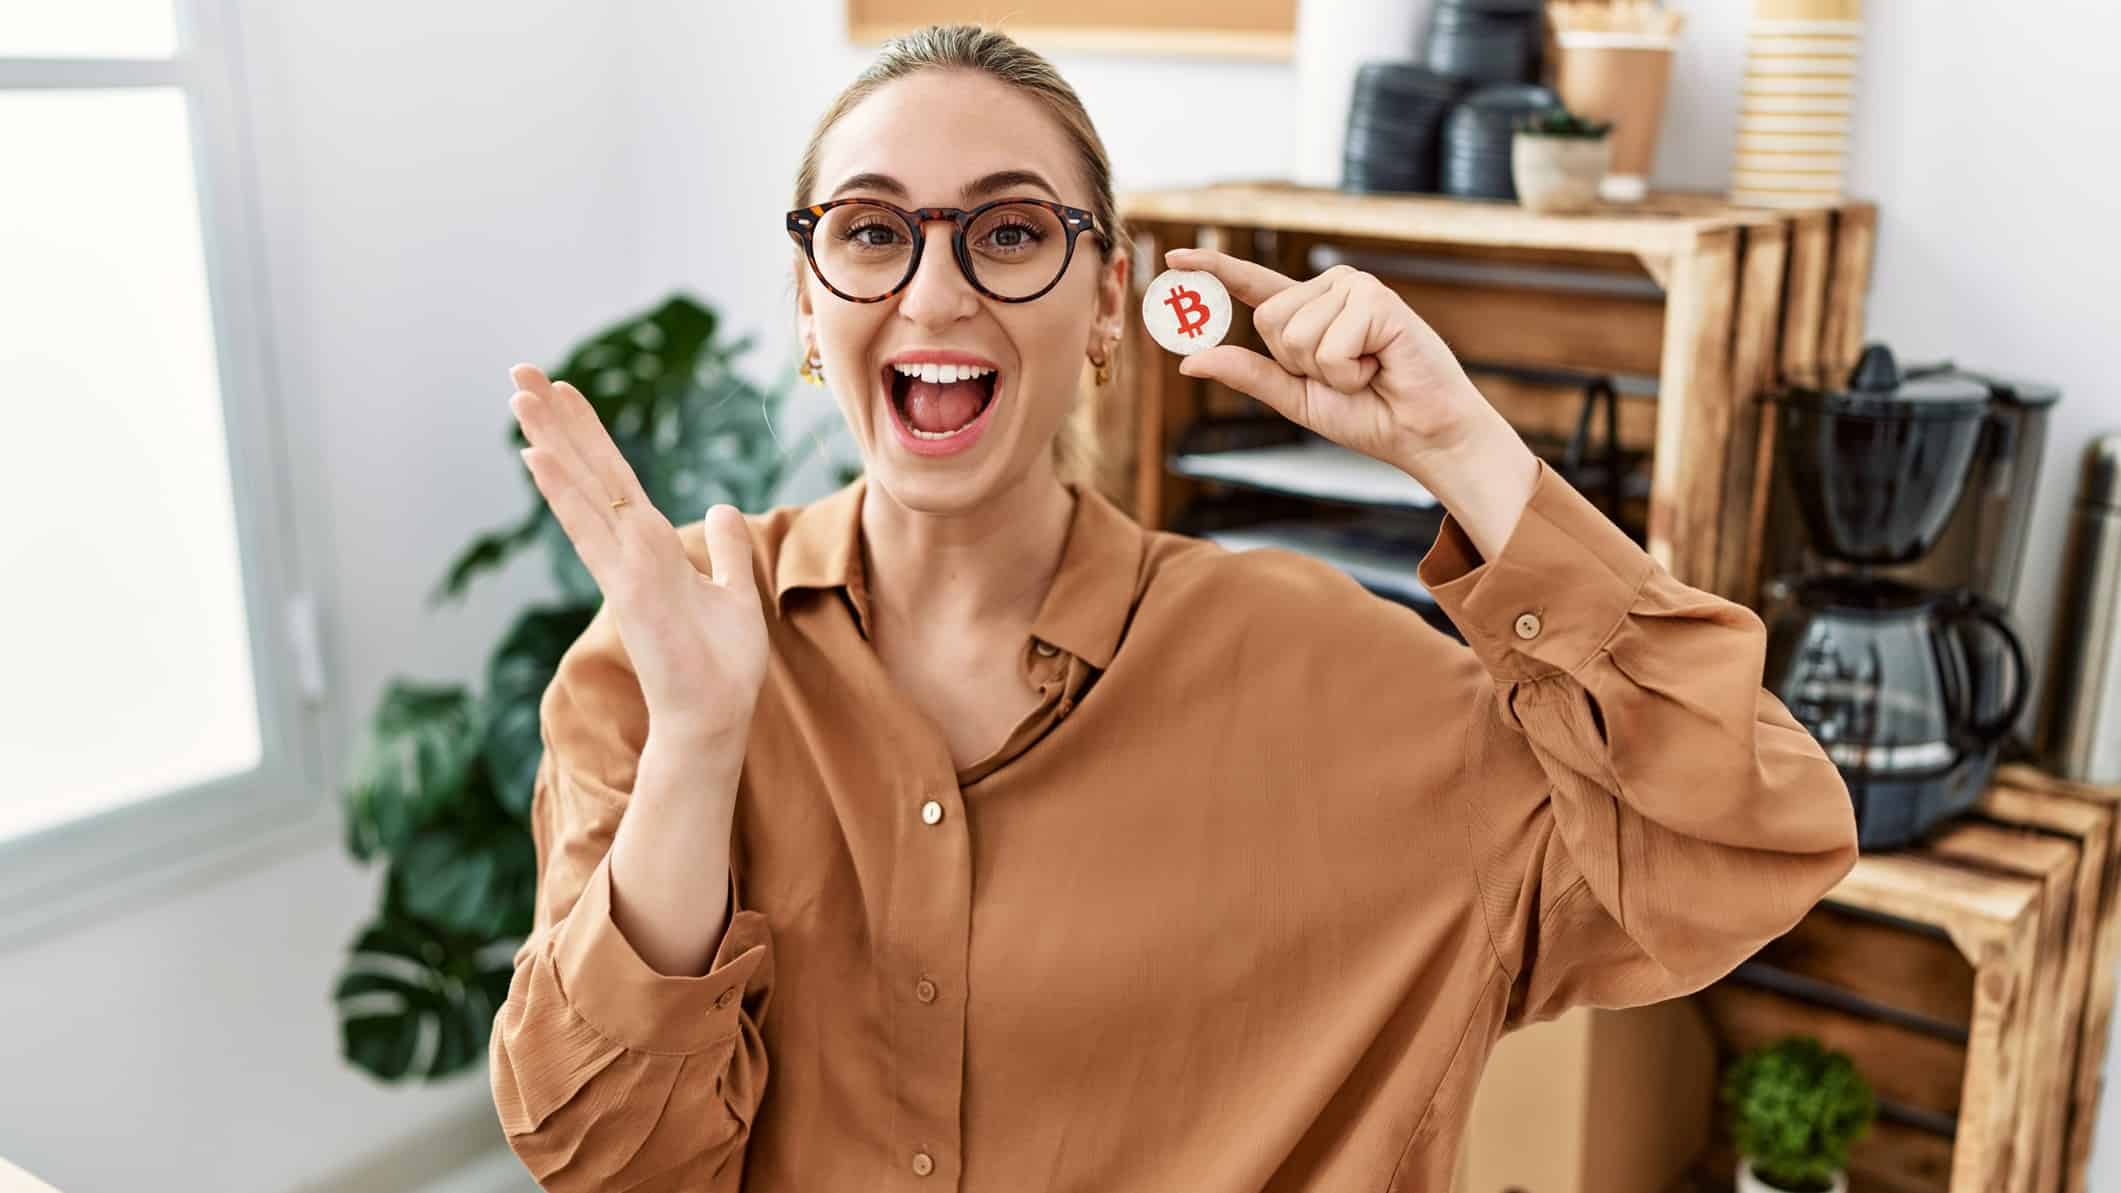 a young woman wearing work wear in an office setting has a lively, happy openmouthed expression of joy while holding one hand up in a happy gesture while holding a bitcoin token in the other hand.